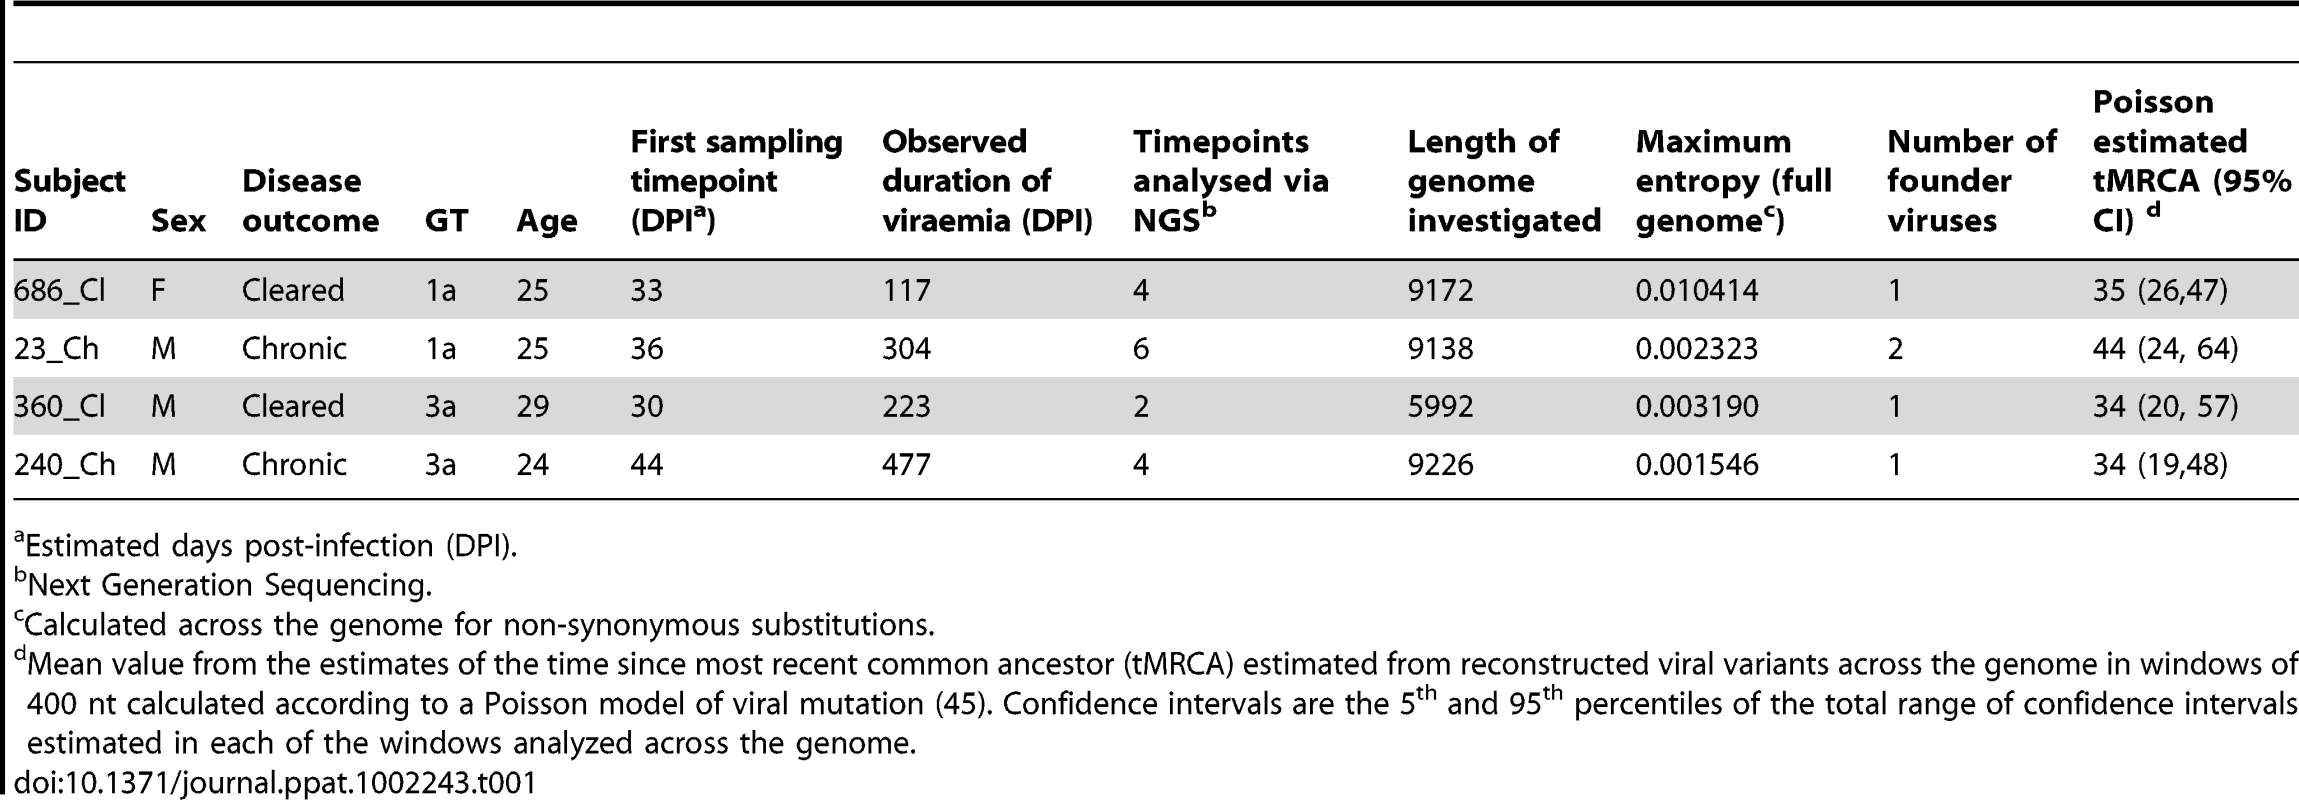 Subject characteristics, number of founder viruses, and estimates of the time since the most recent common ancestor (tMRCA).